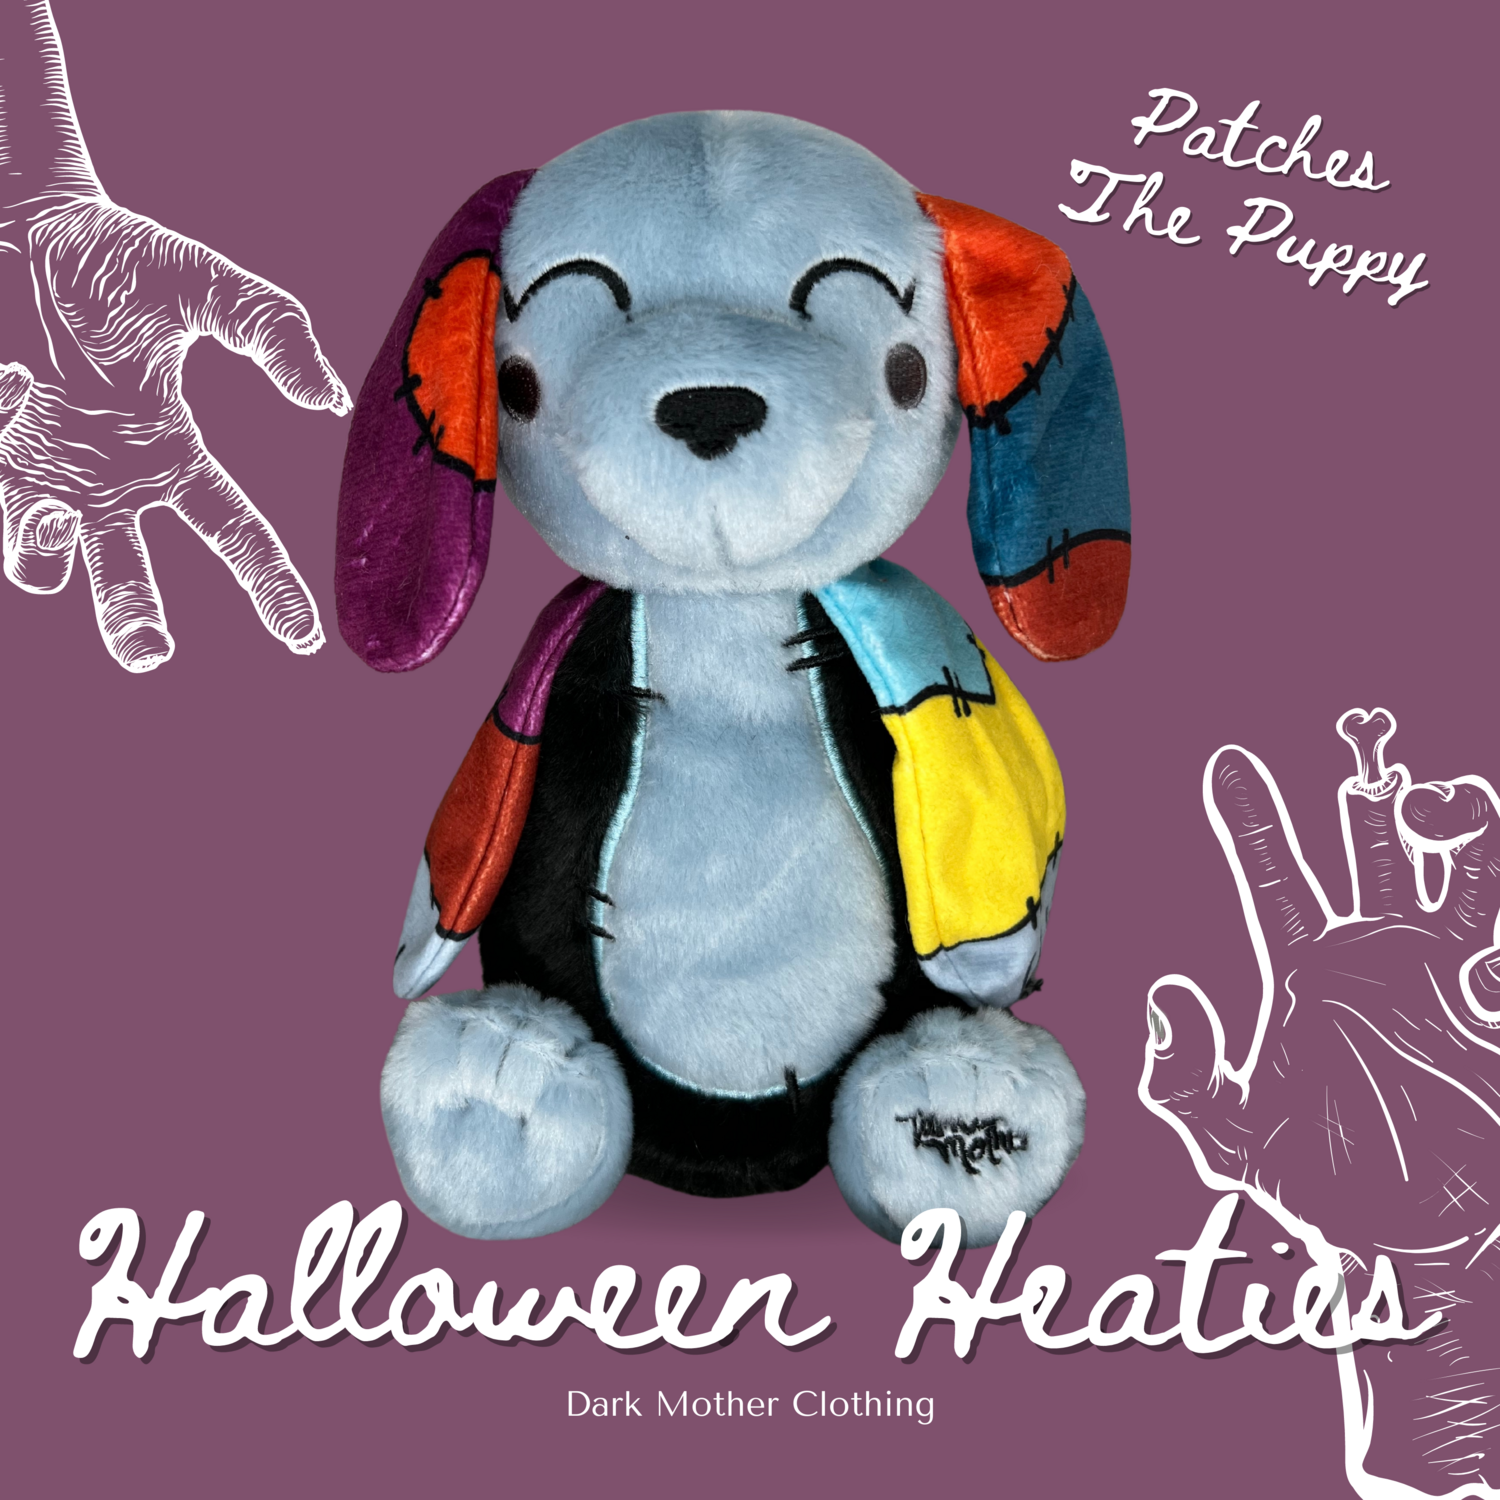 S + F | Halloween Heaties - Patches the Puppy